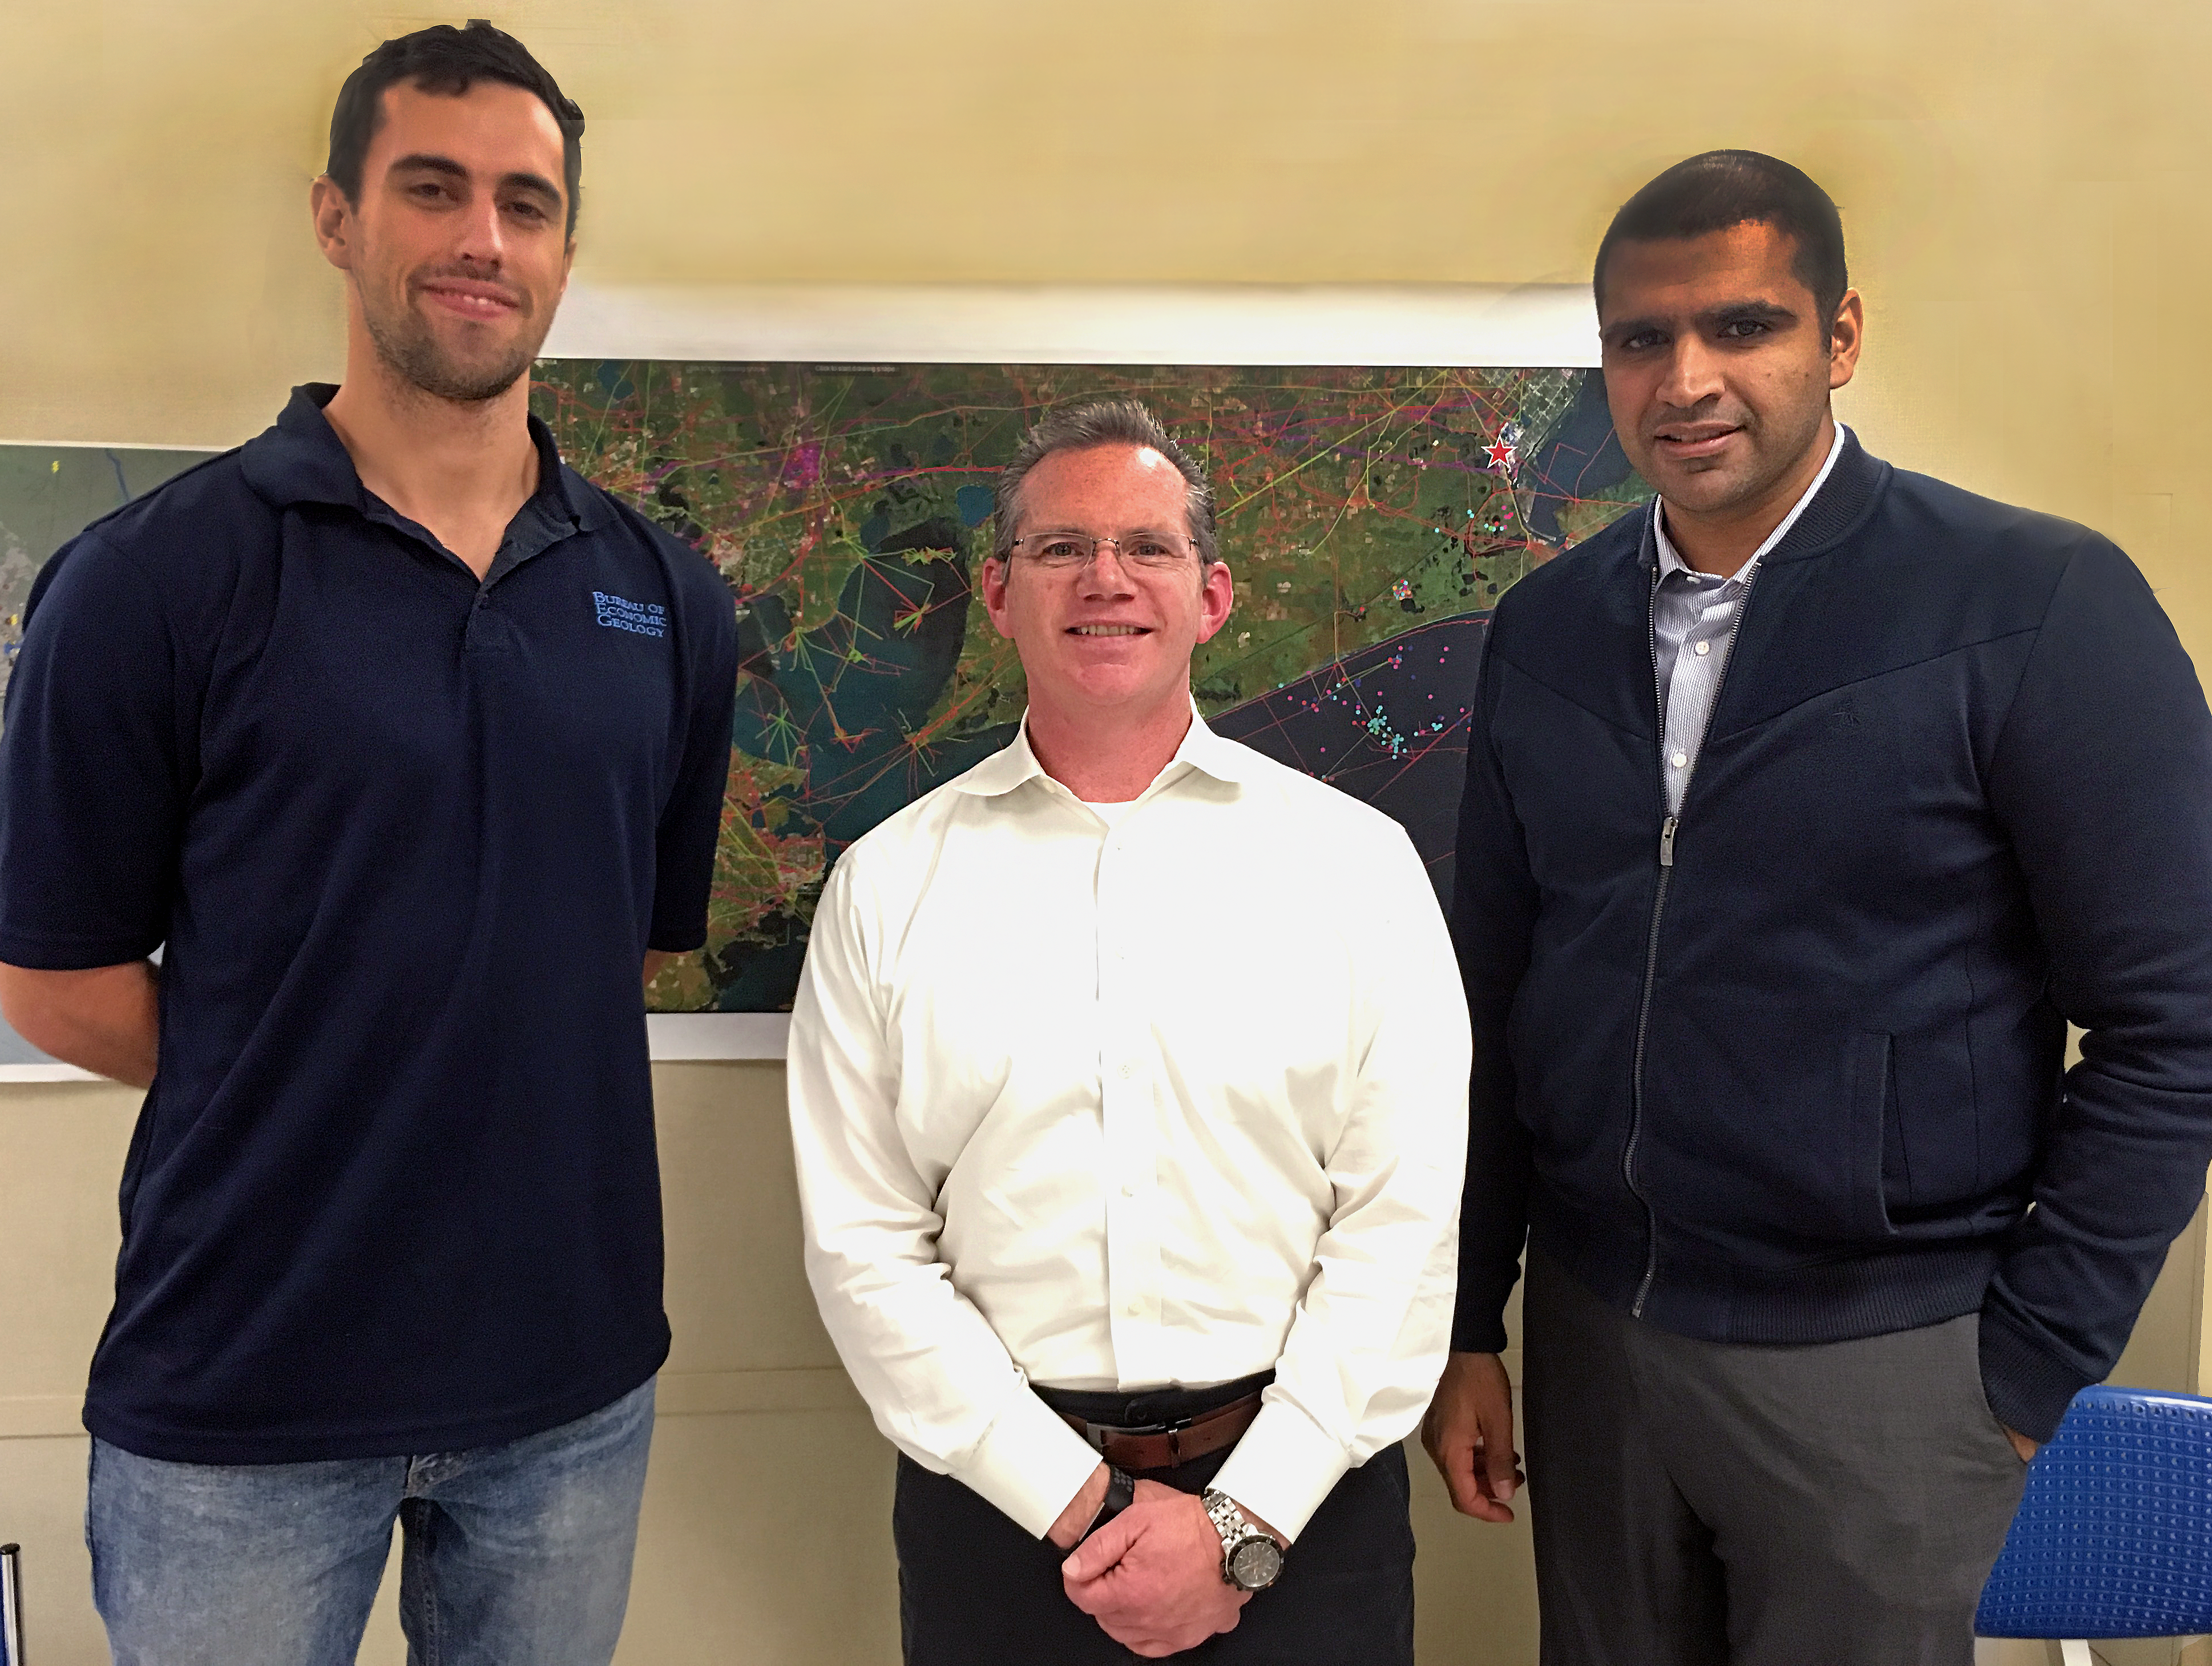 Peter Tutton of GCCC with Ray McKaskle and Darshan Sachde from Trimeric Corporation